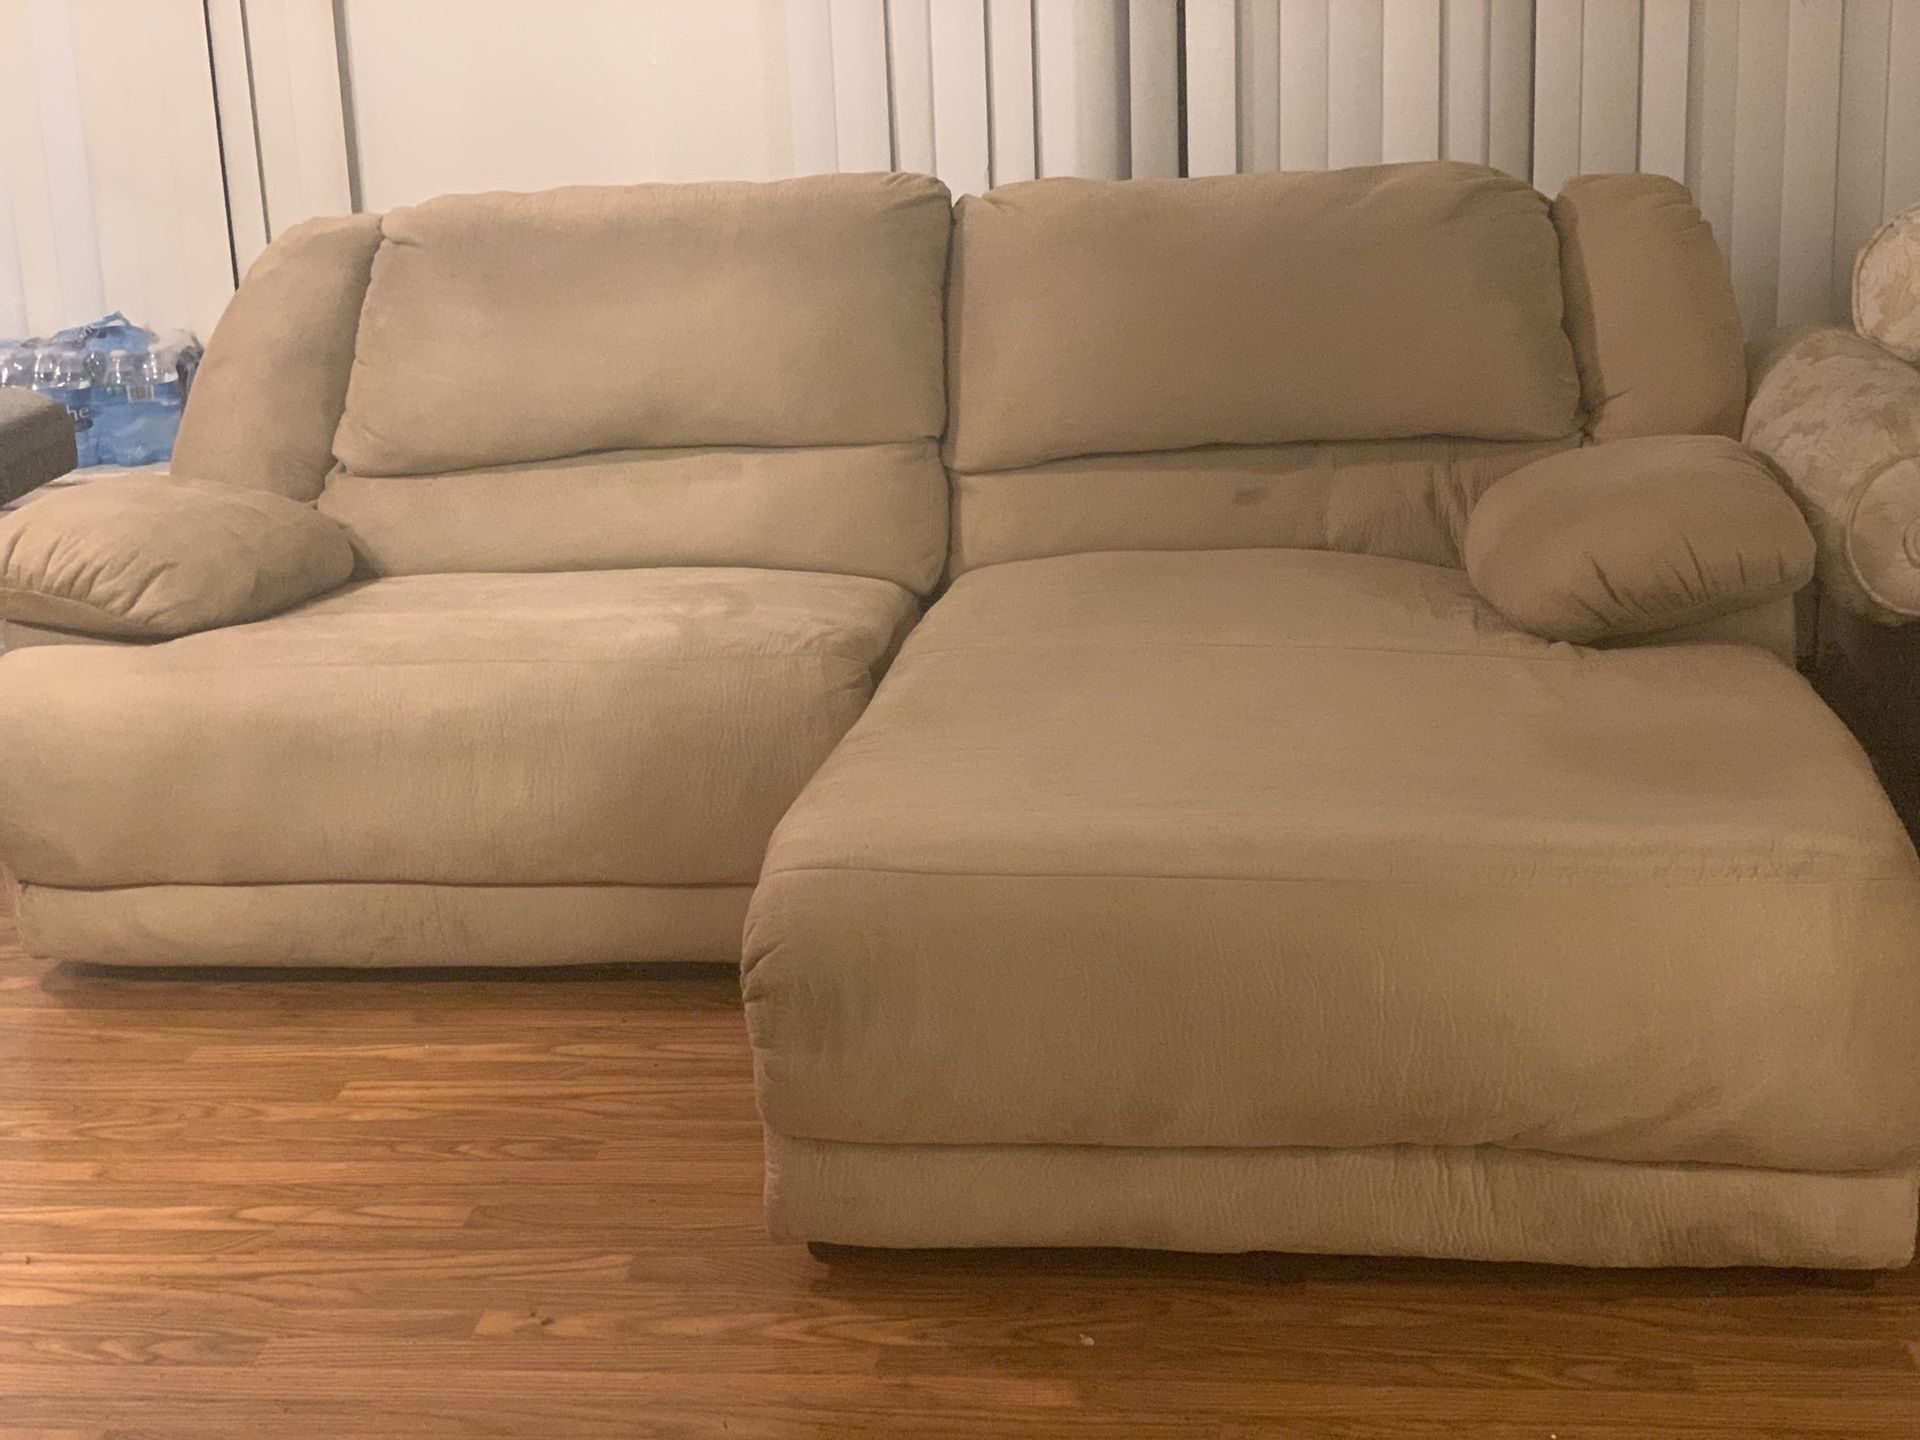 Couch with recliner (his & hers)